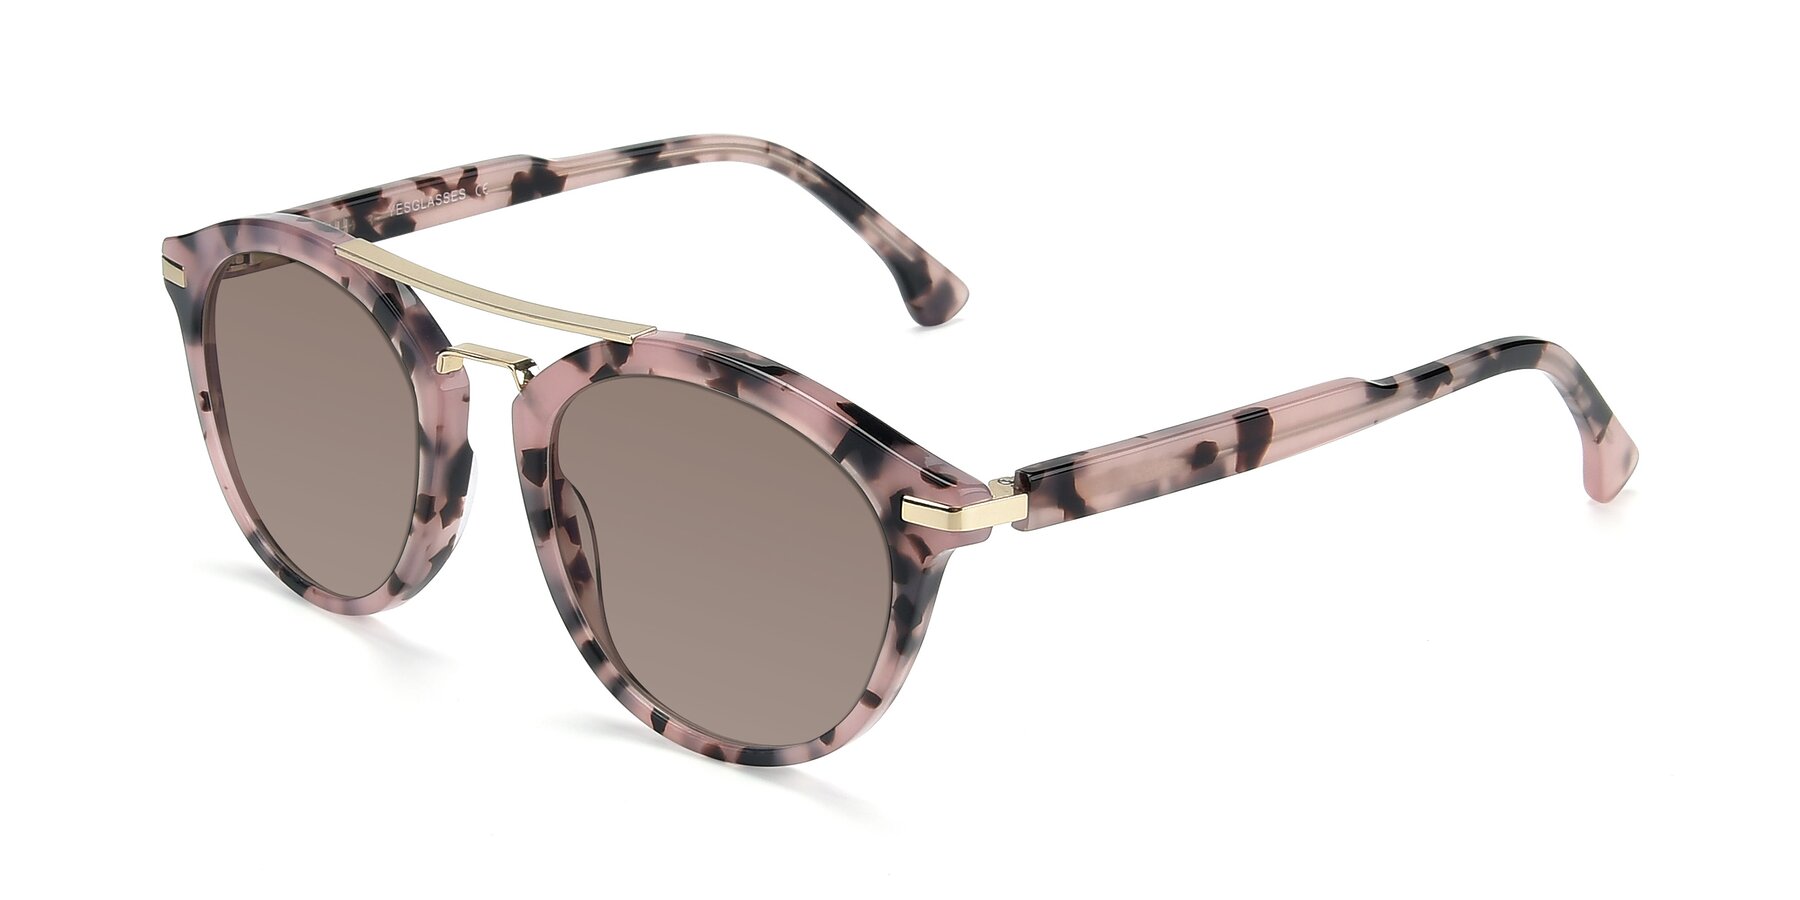 Angle of 17236 in Havana Floral-Gold with Medium Brown Tinted Lenses